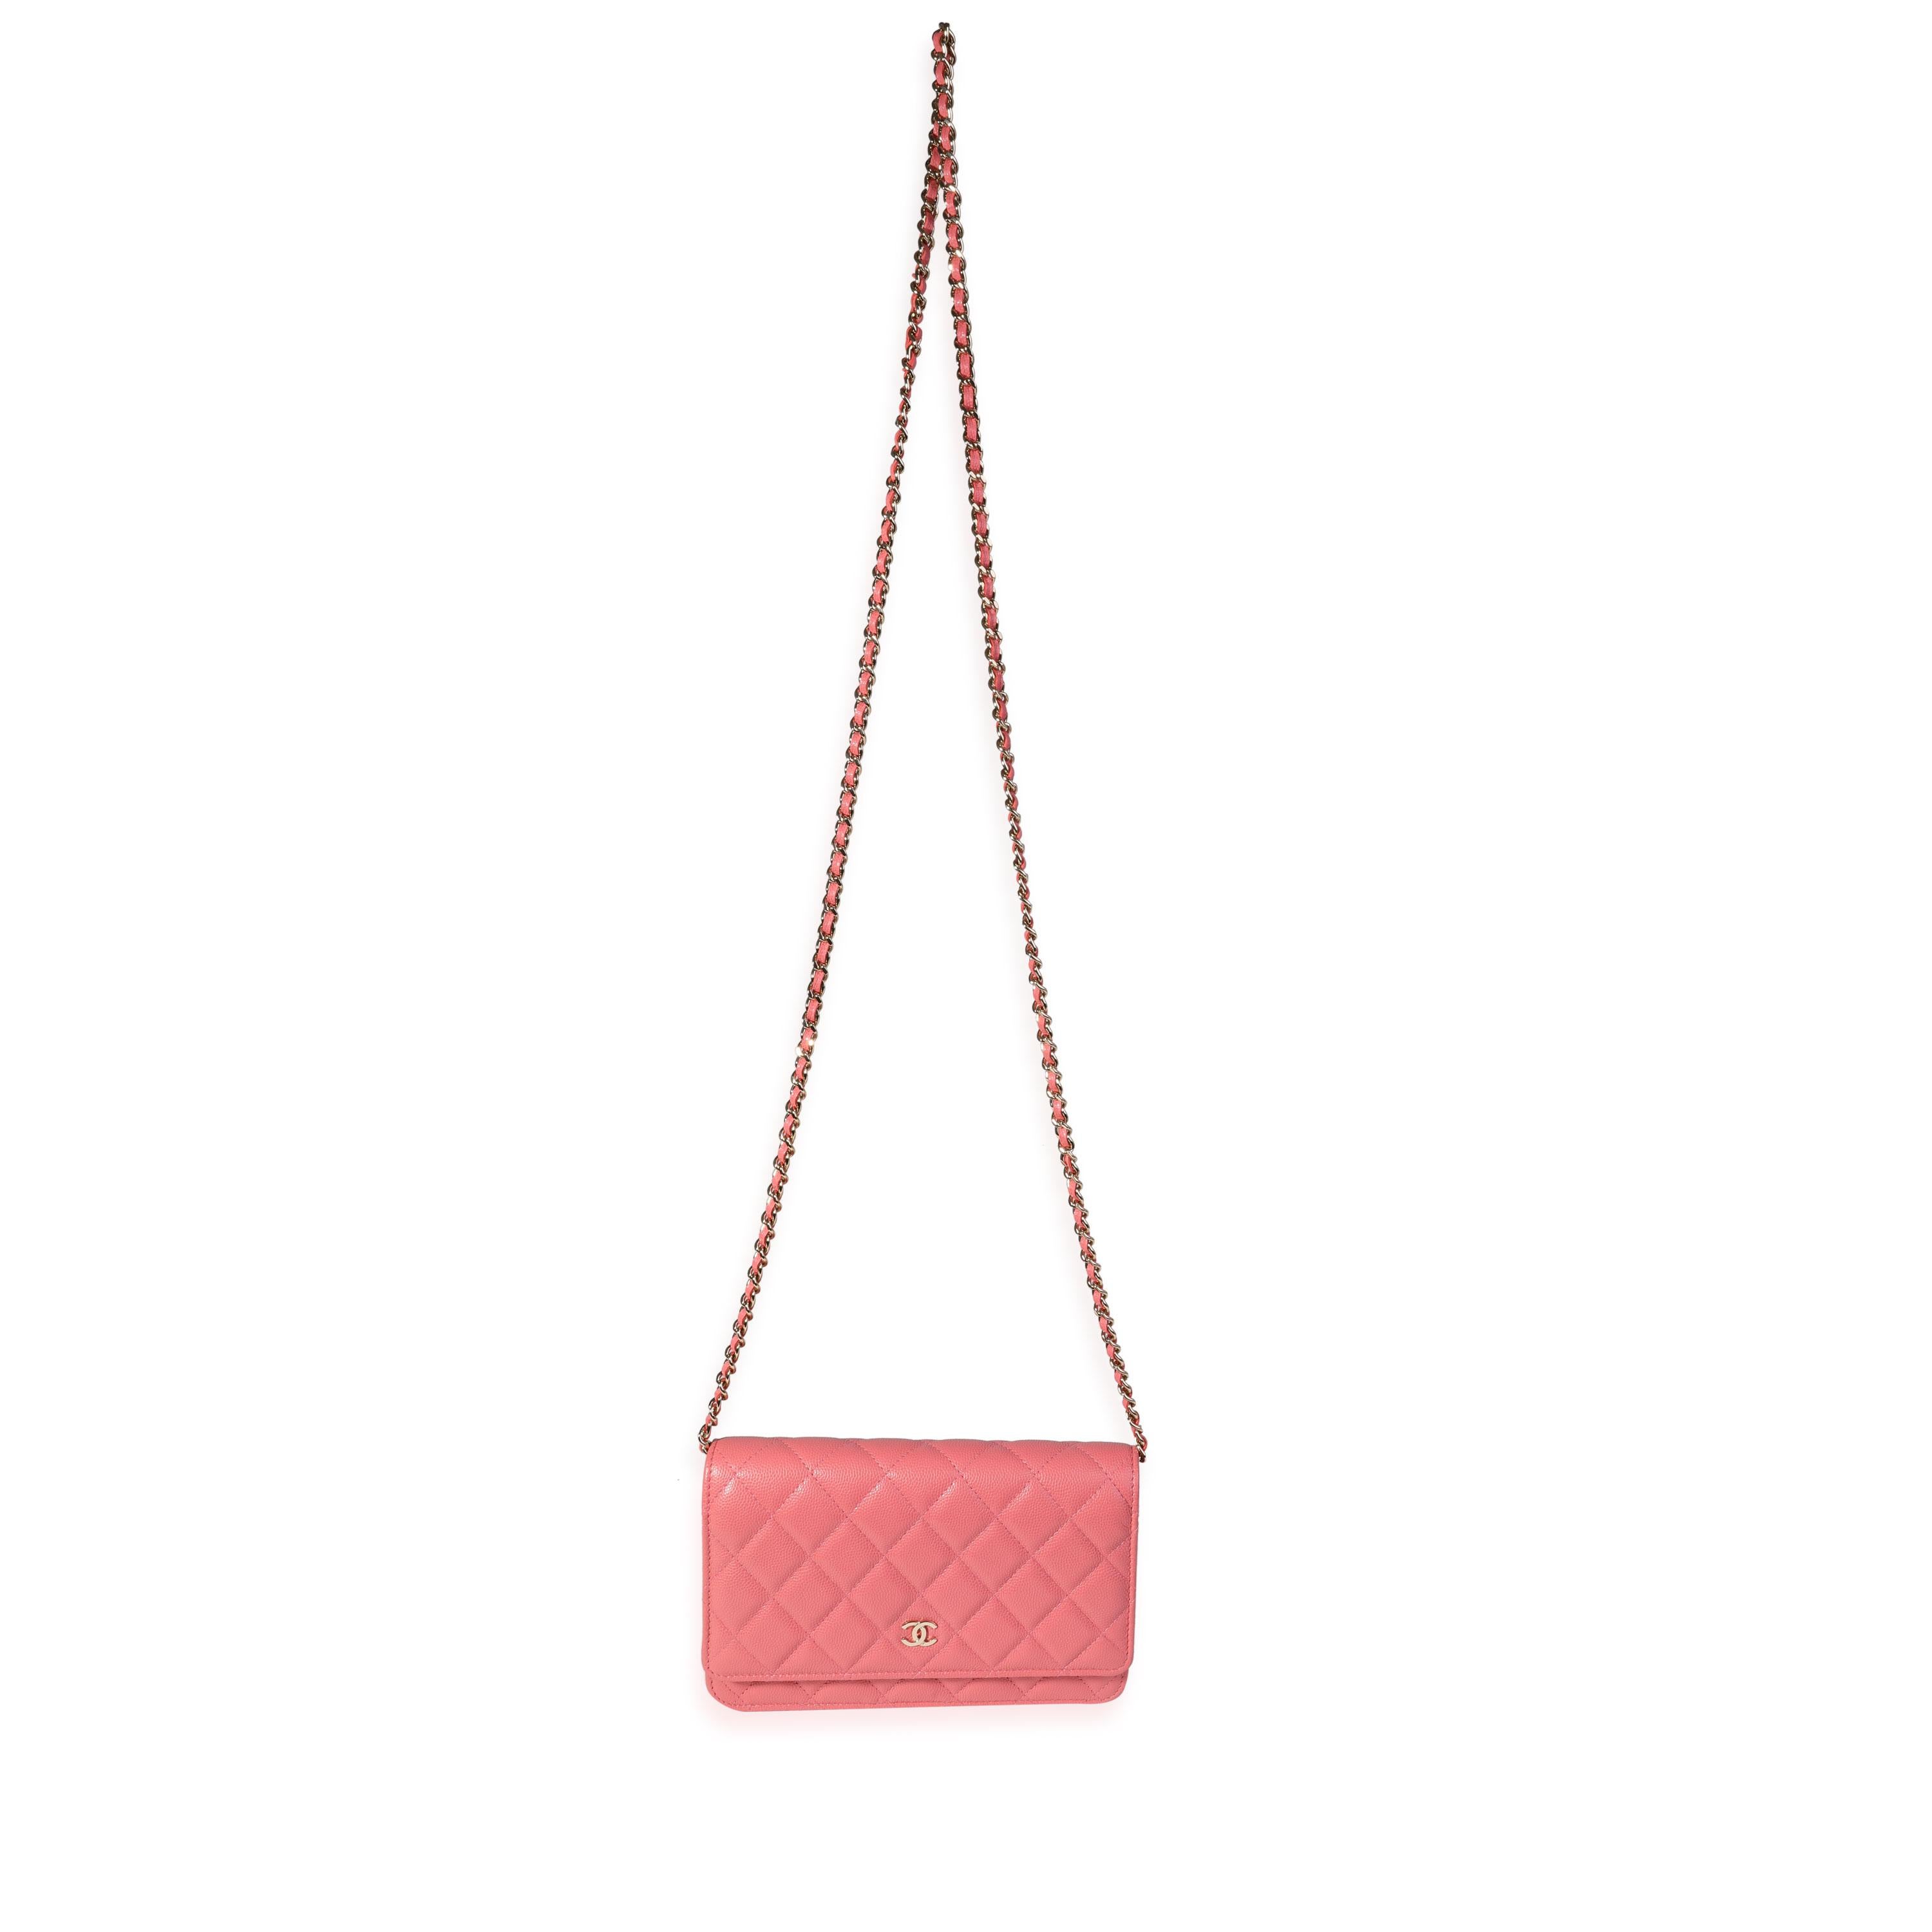 Listing Title: Chanel Pink Quilted Caviar Wallet on Chain
SKU: 119468
Handbag Condition: Never Worn

Brand: Chanel
Model: WOC
Origin Country: Italy
Handbag Silhouette: Crossbody Bag;Mini;Shoulder Bag
Size (Generic): Small
Year Manufactured: